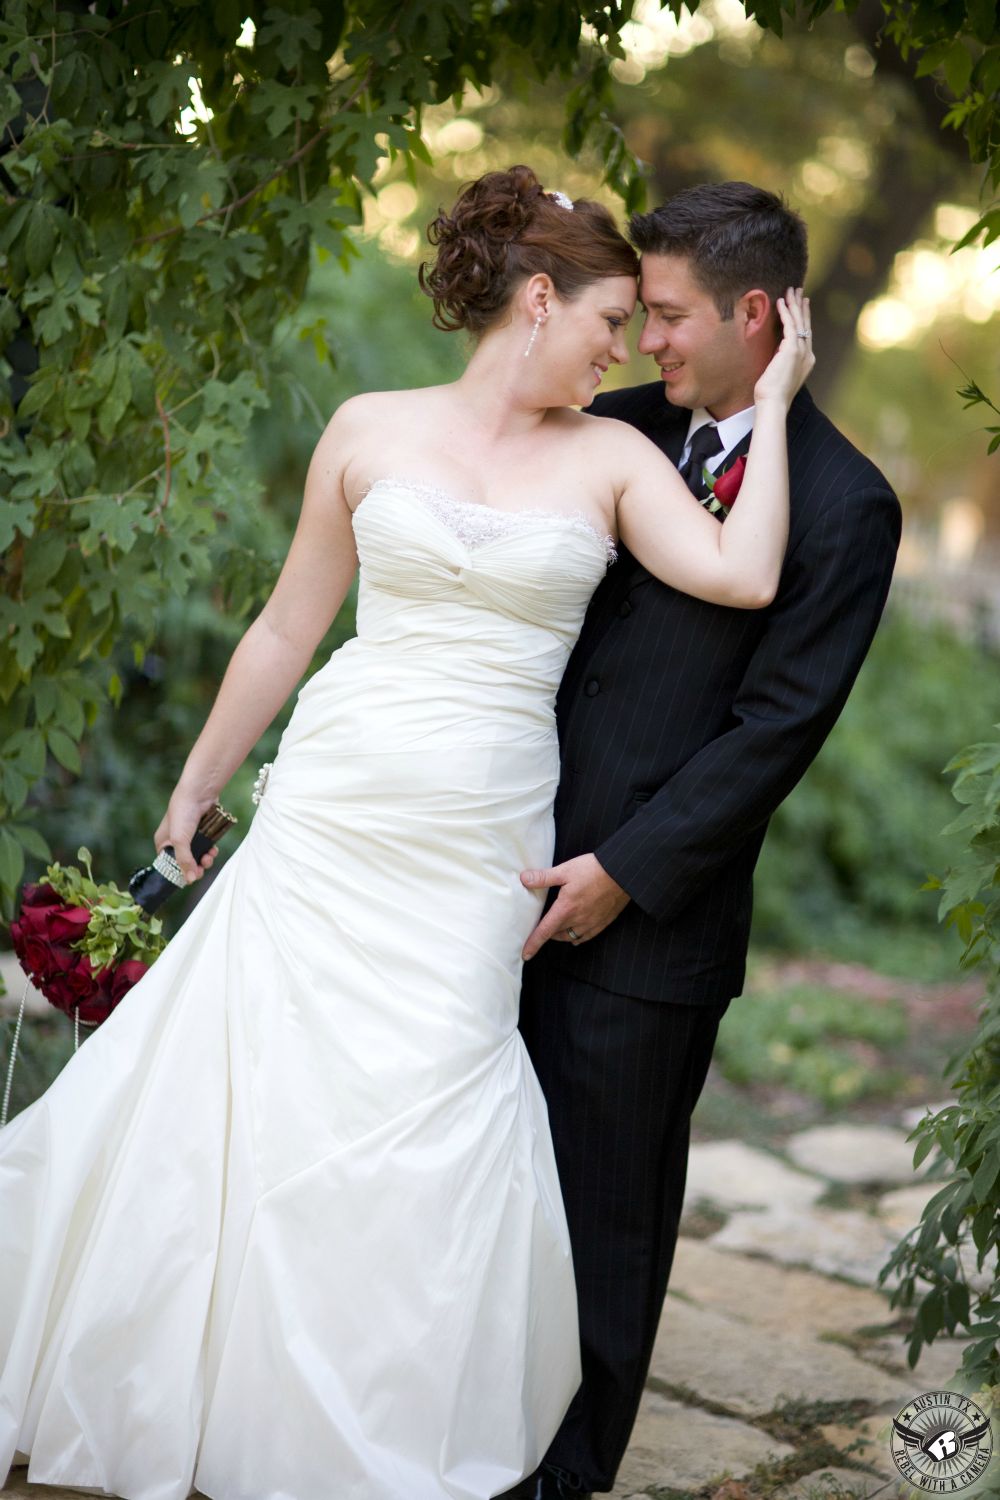 Bride with red rose bridal bouquet by Creative Innovations florist and groom in black tuxedo and red rose bud boutonniere embrace in front of vine covered arch at Inn at Salado Texas wedding venue.